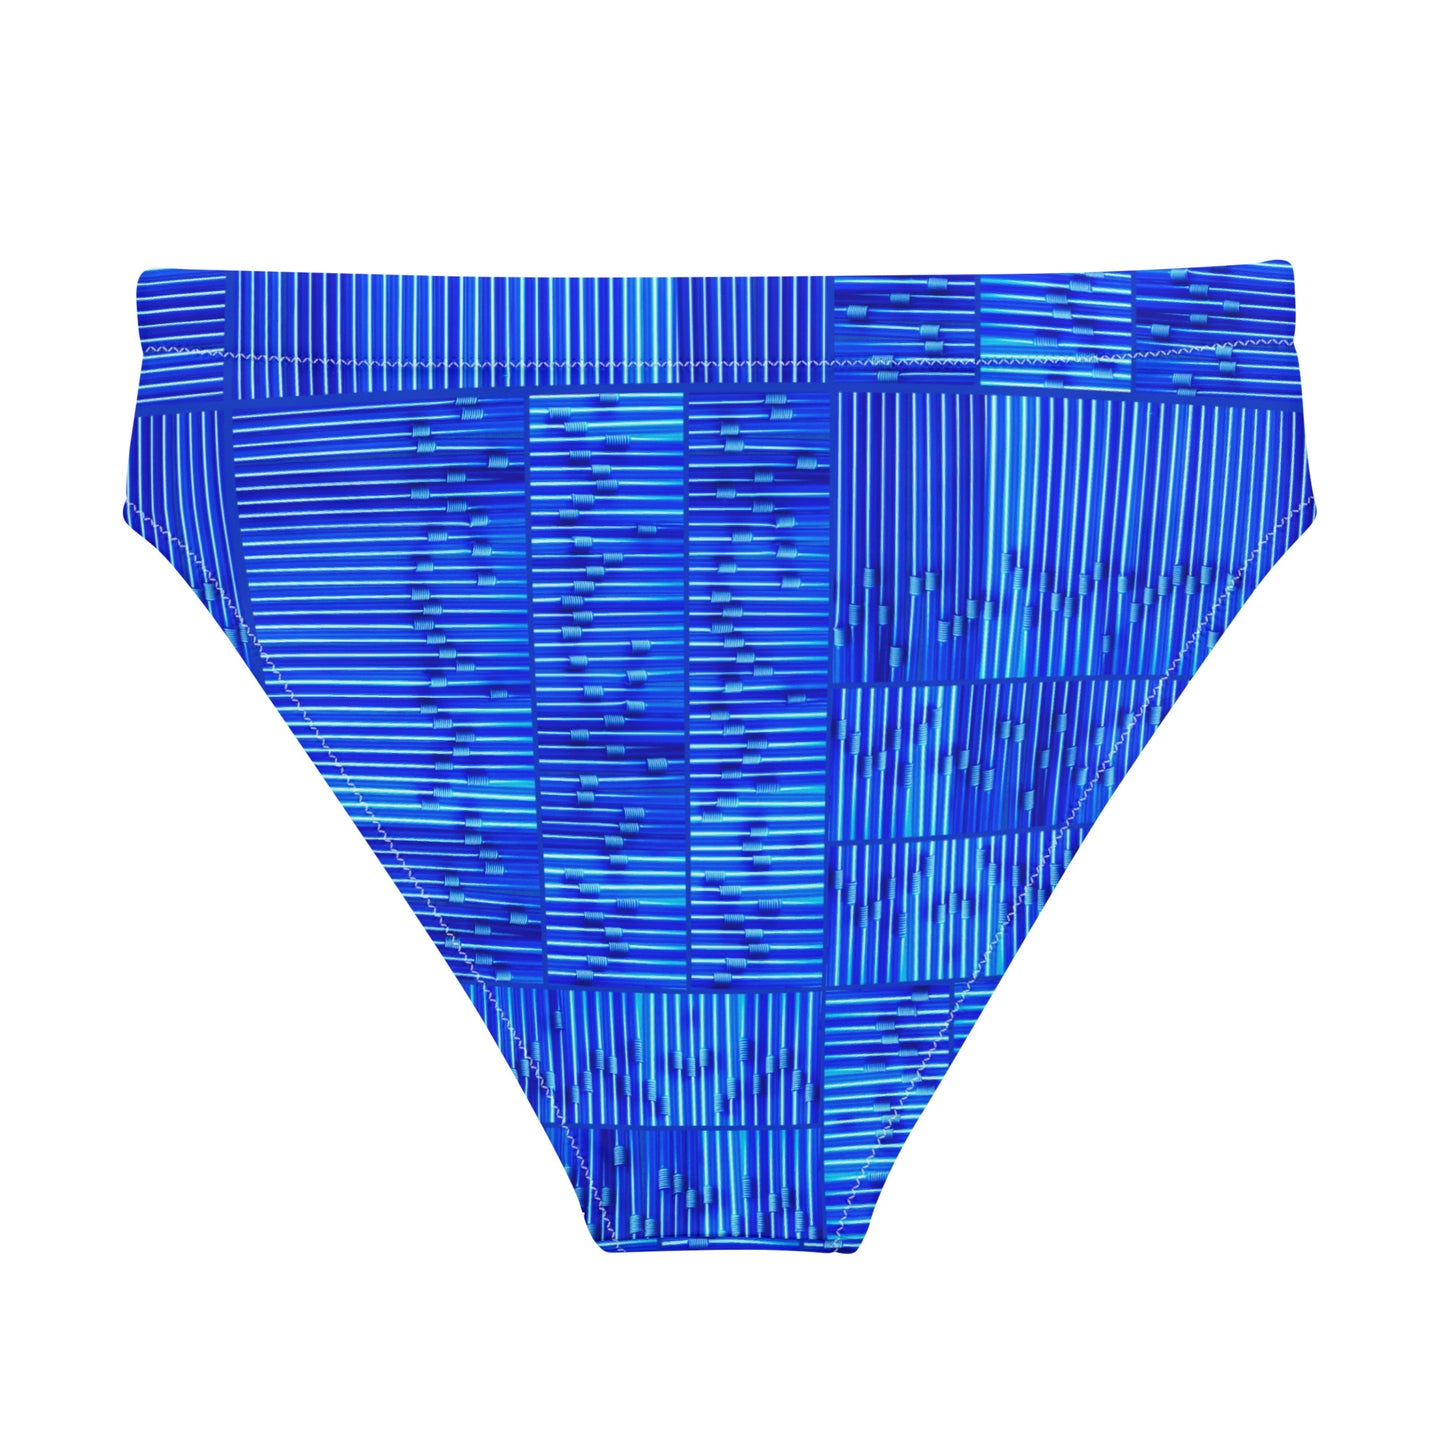 PLASTIC STRAW BLUES - SUPcycled bottoms